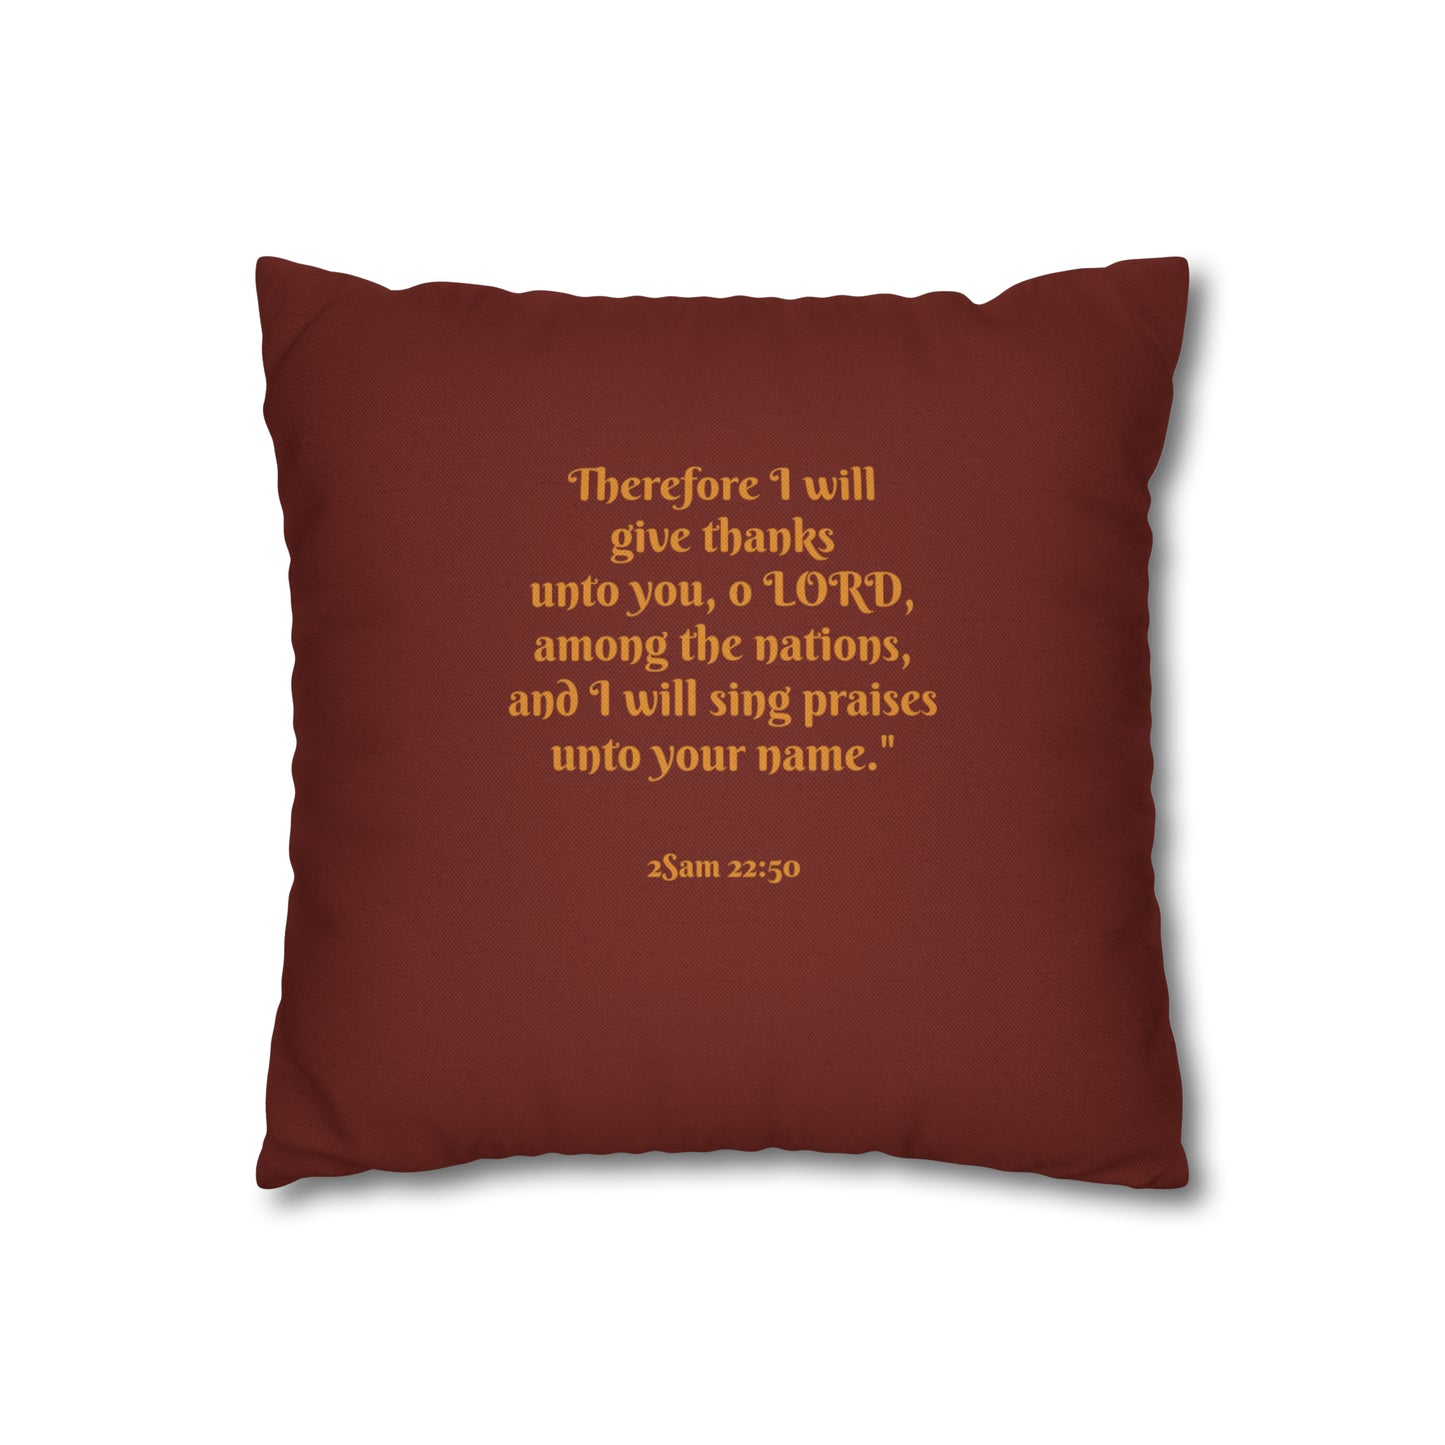 Giving thanks 3 / Square Pillow Case